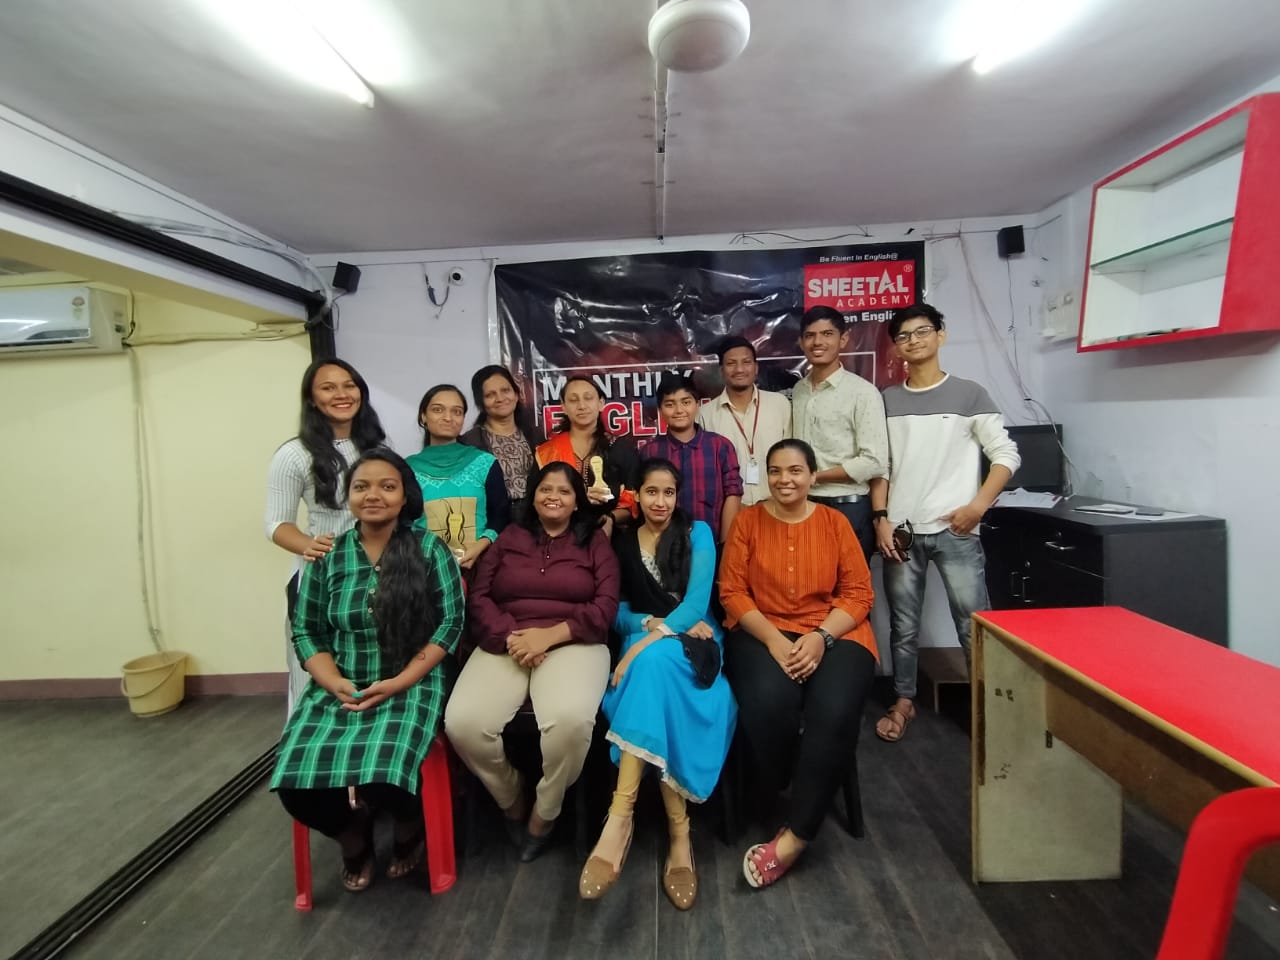 Course Completion Celebration by Sheetal Academy